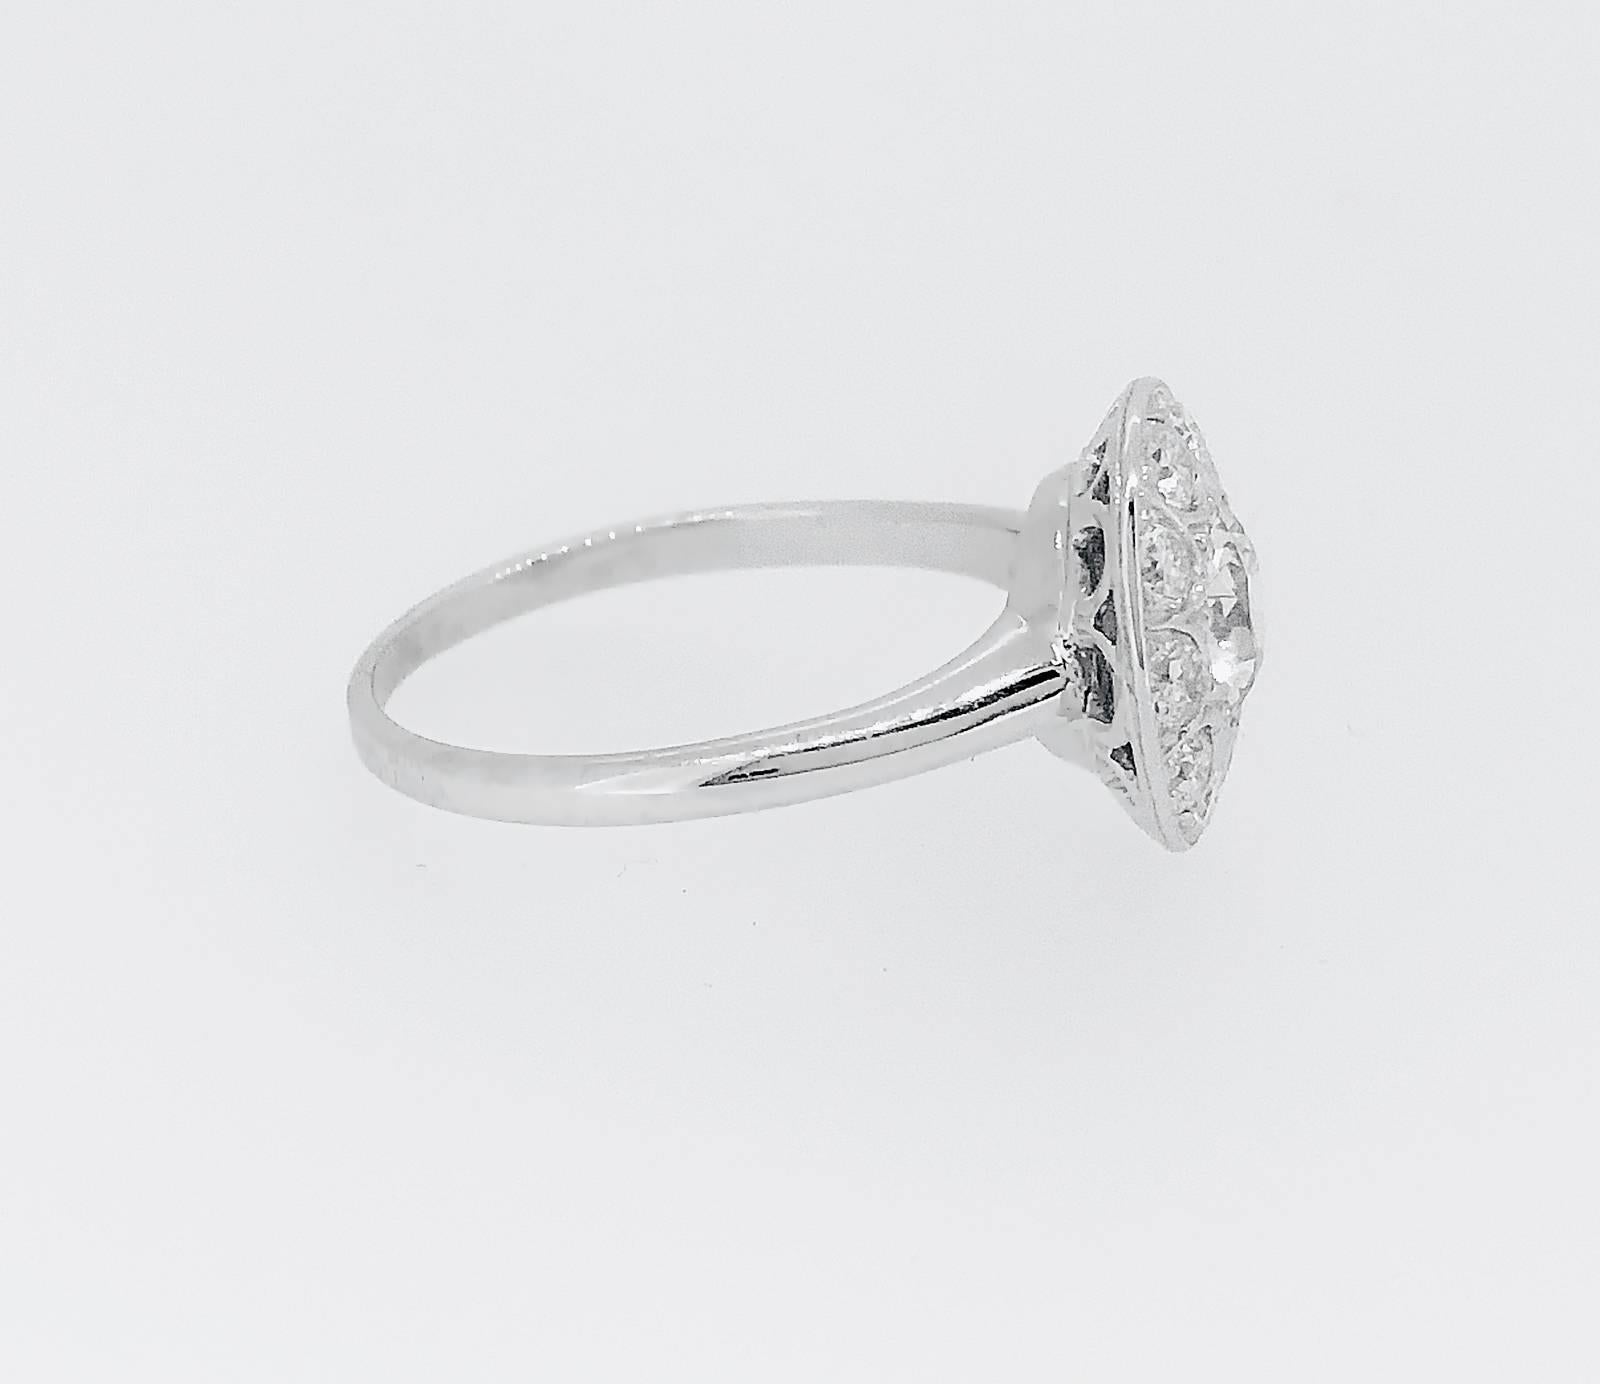 A hard to find Art Deco halo Antique engagement ring that features a .80ct. apx. Transitional cut diamond with VS1 clarity and J-K color. It is surrounded in a halo style by .50ct. apx. T.W. of transitional round diamonds with VS2-SI1 clarity and